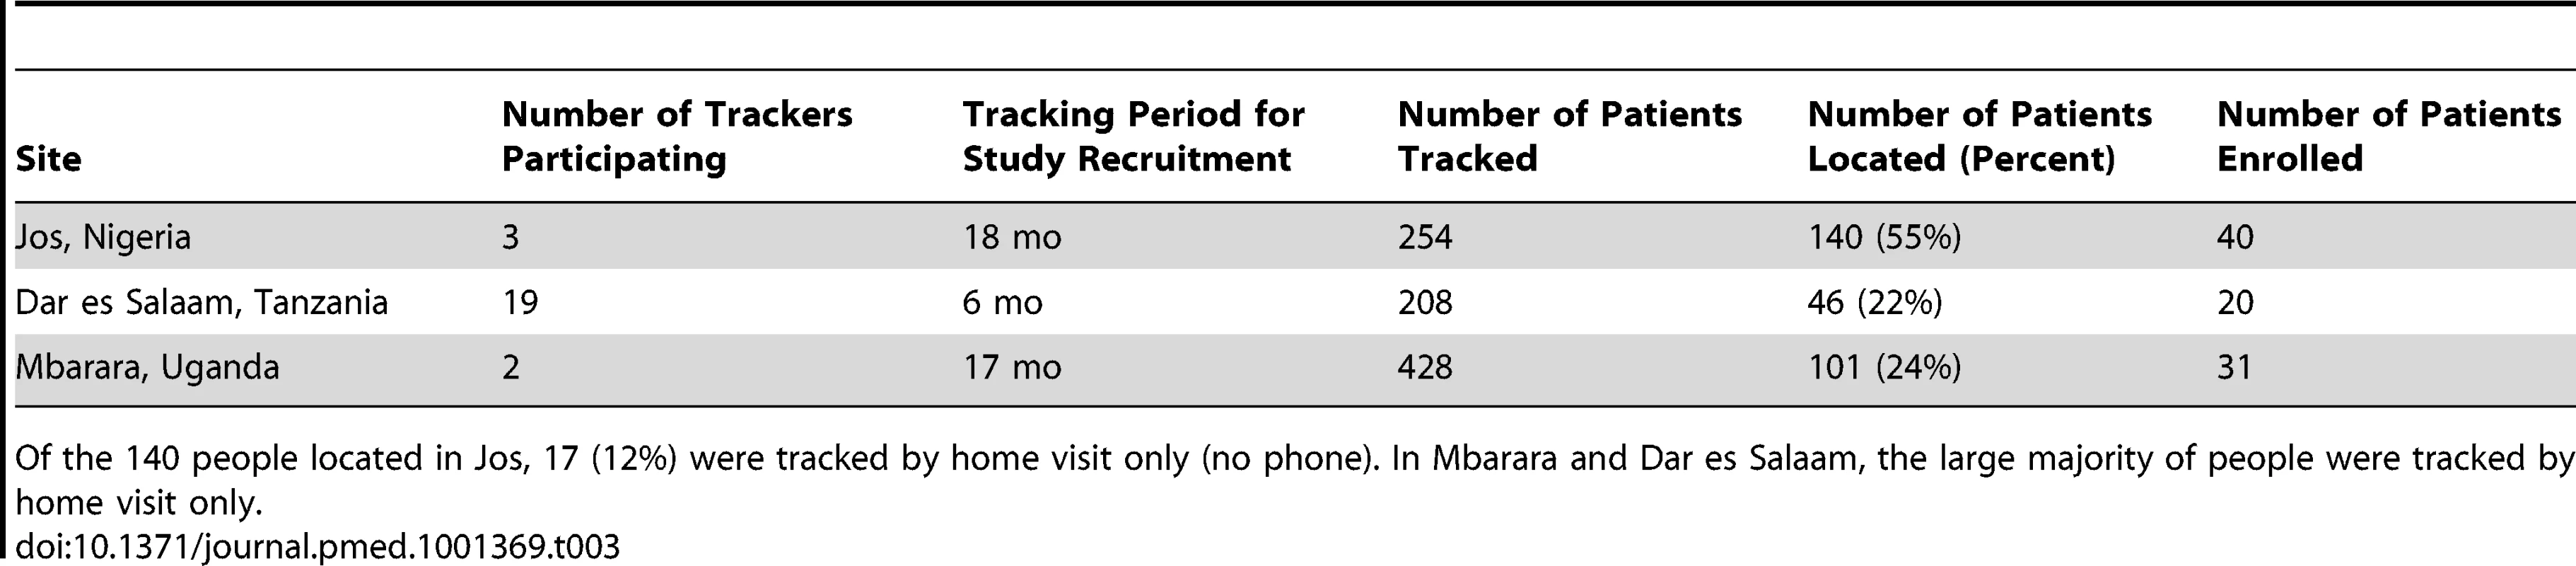 Study tracking activities and outcomes.